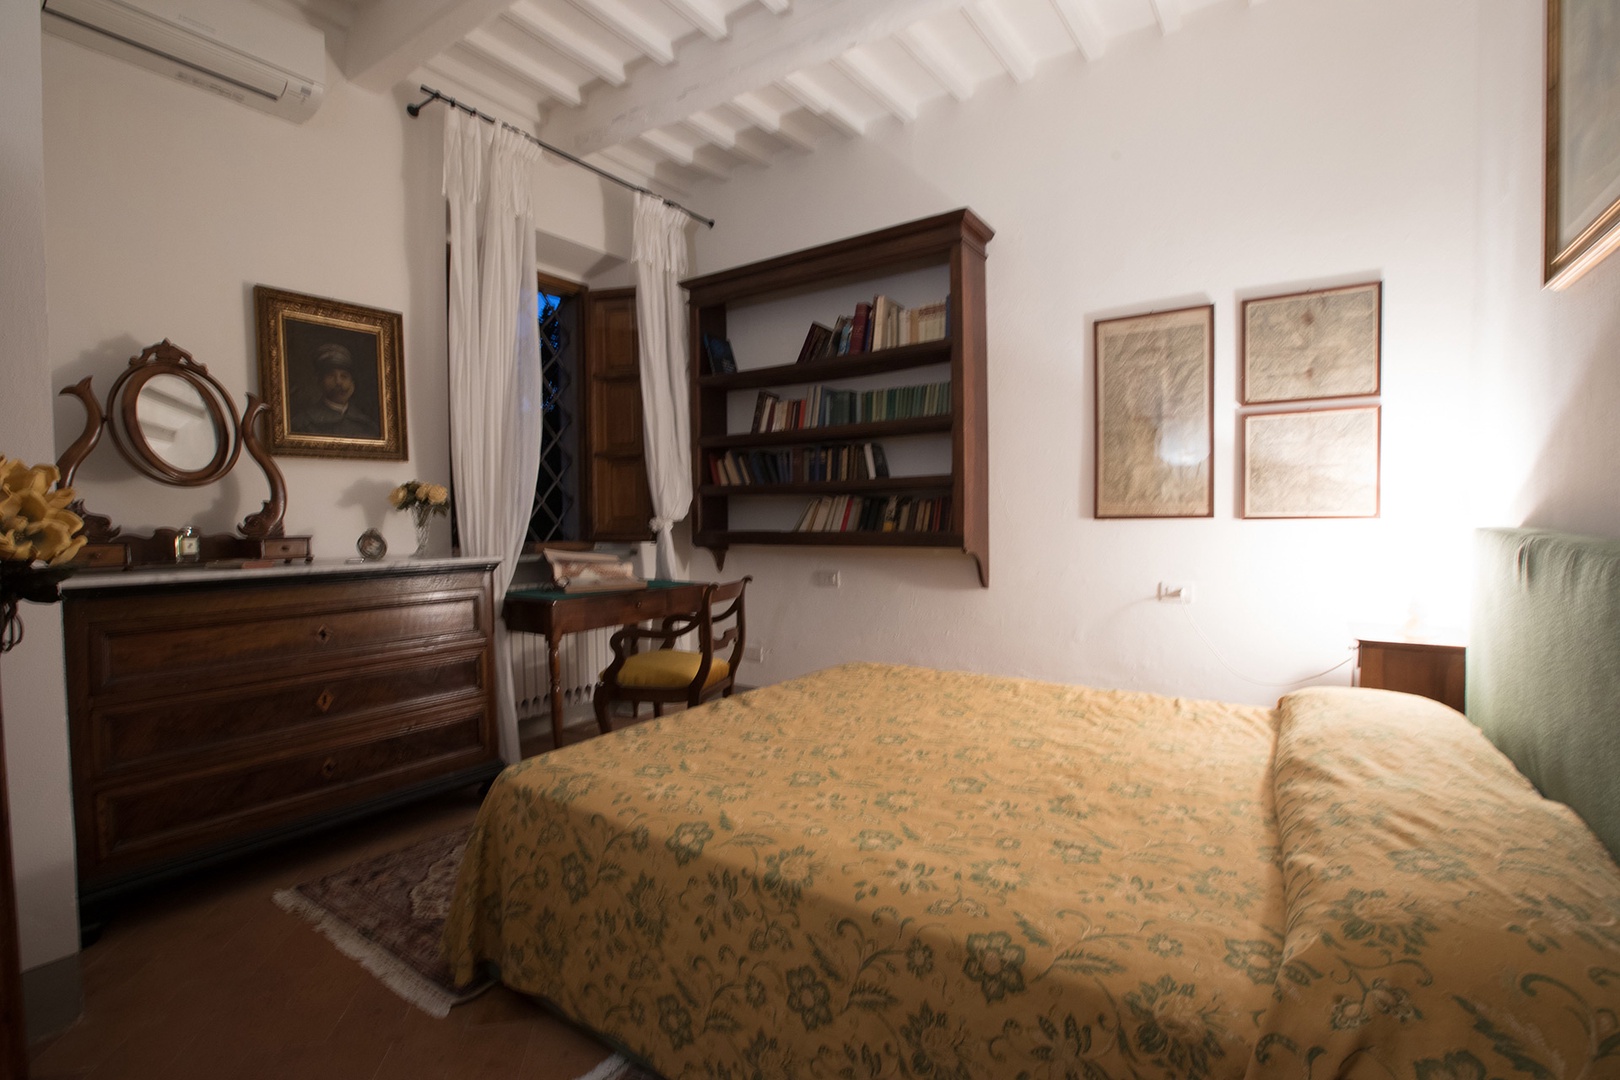 Bedroom 1 is situated on the main floor. It has a writing desk for your convenience.